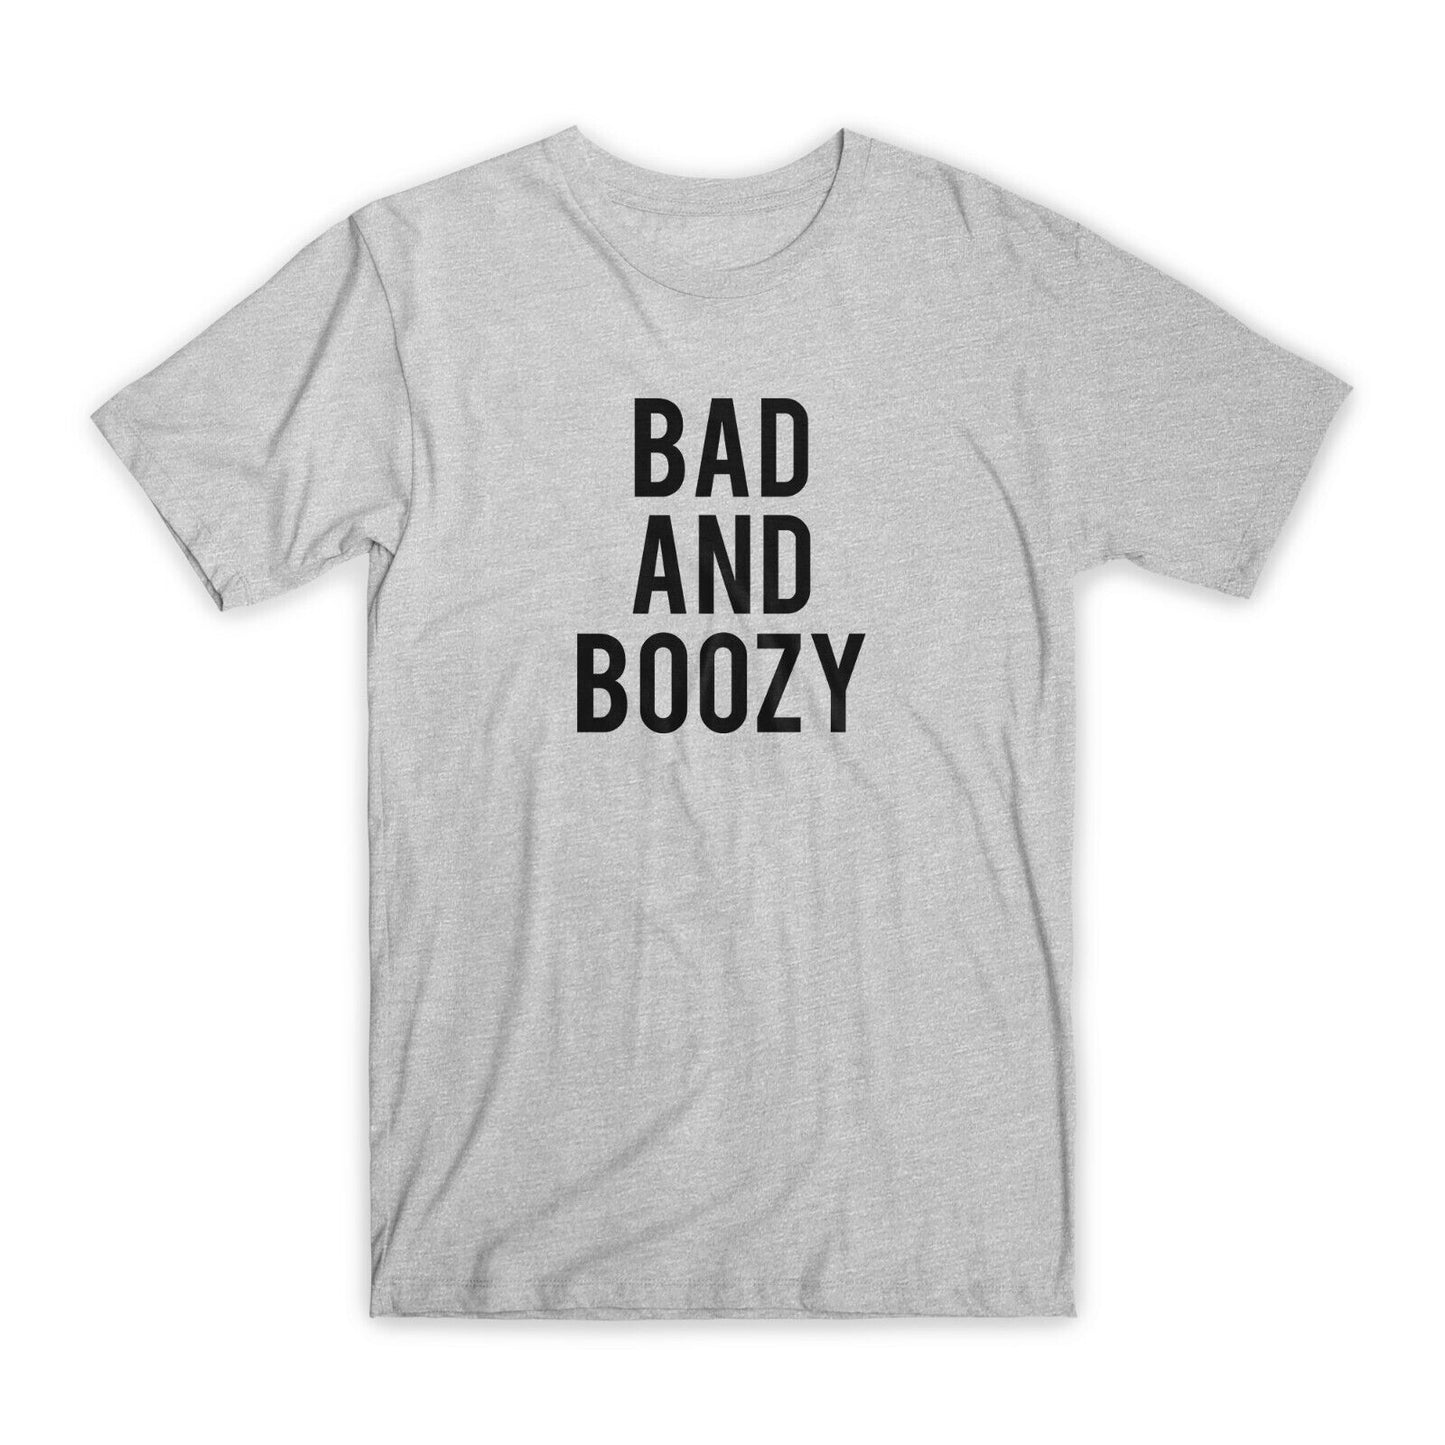 Bad and Boozy T-Shirt Premium Soft Cotton Crew Neck Funny Tees Novelty Gifts NEW